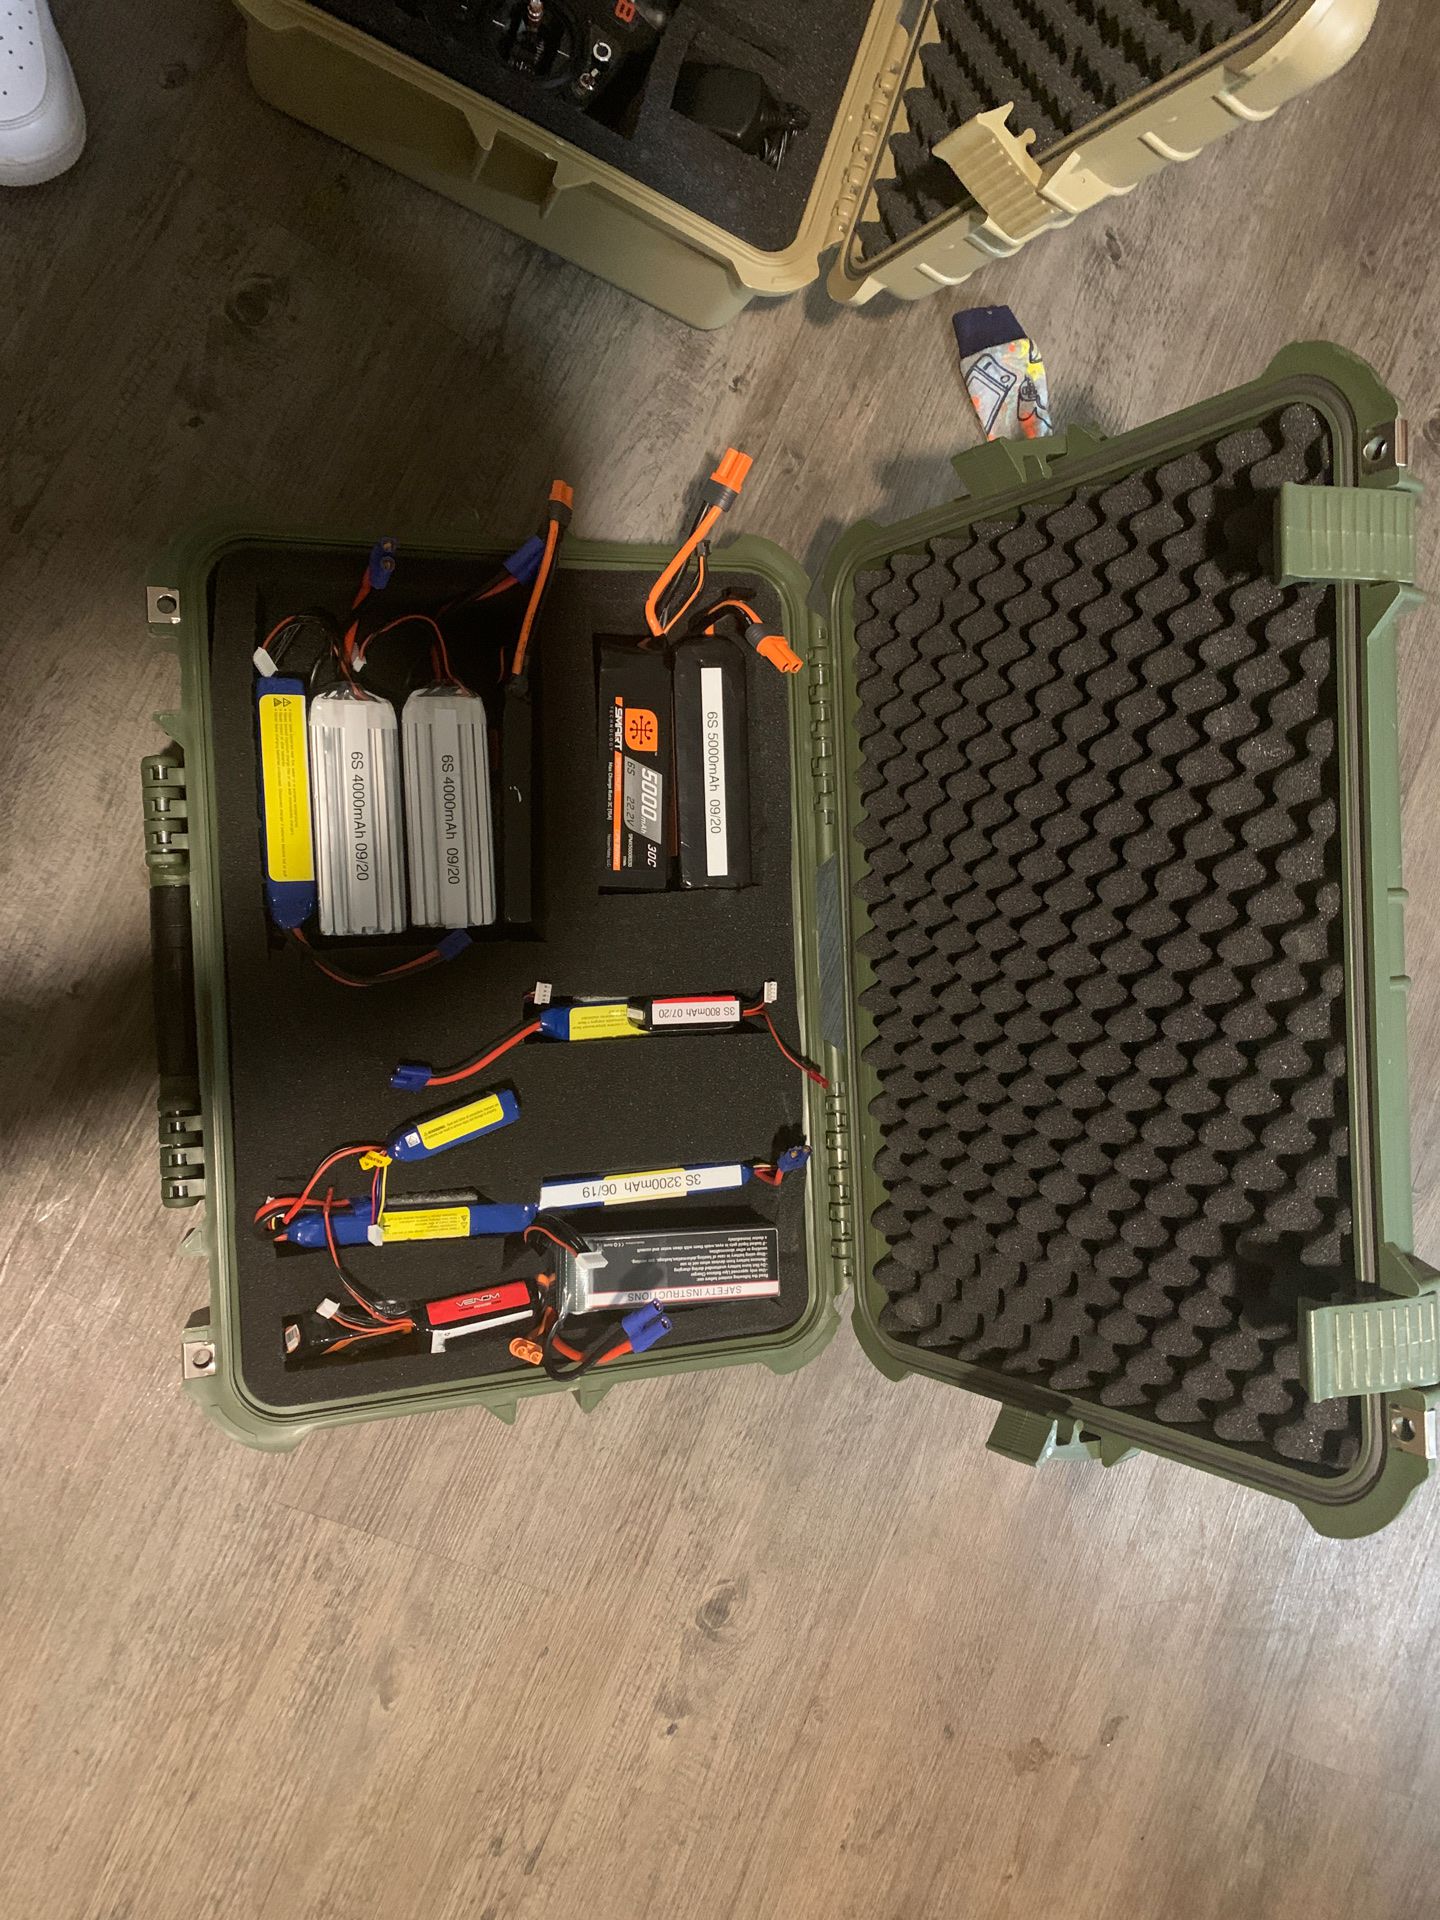 DX8 Batteries and Controller for Airplane